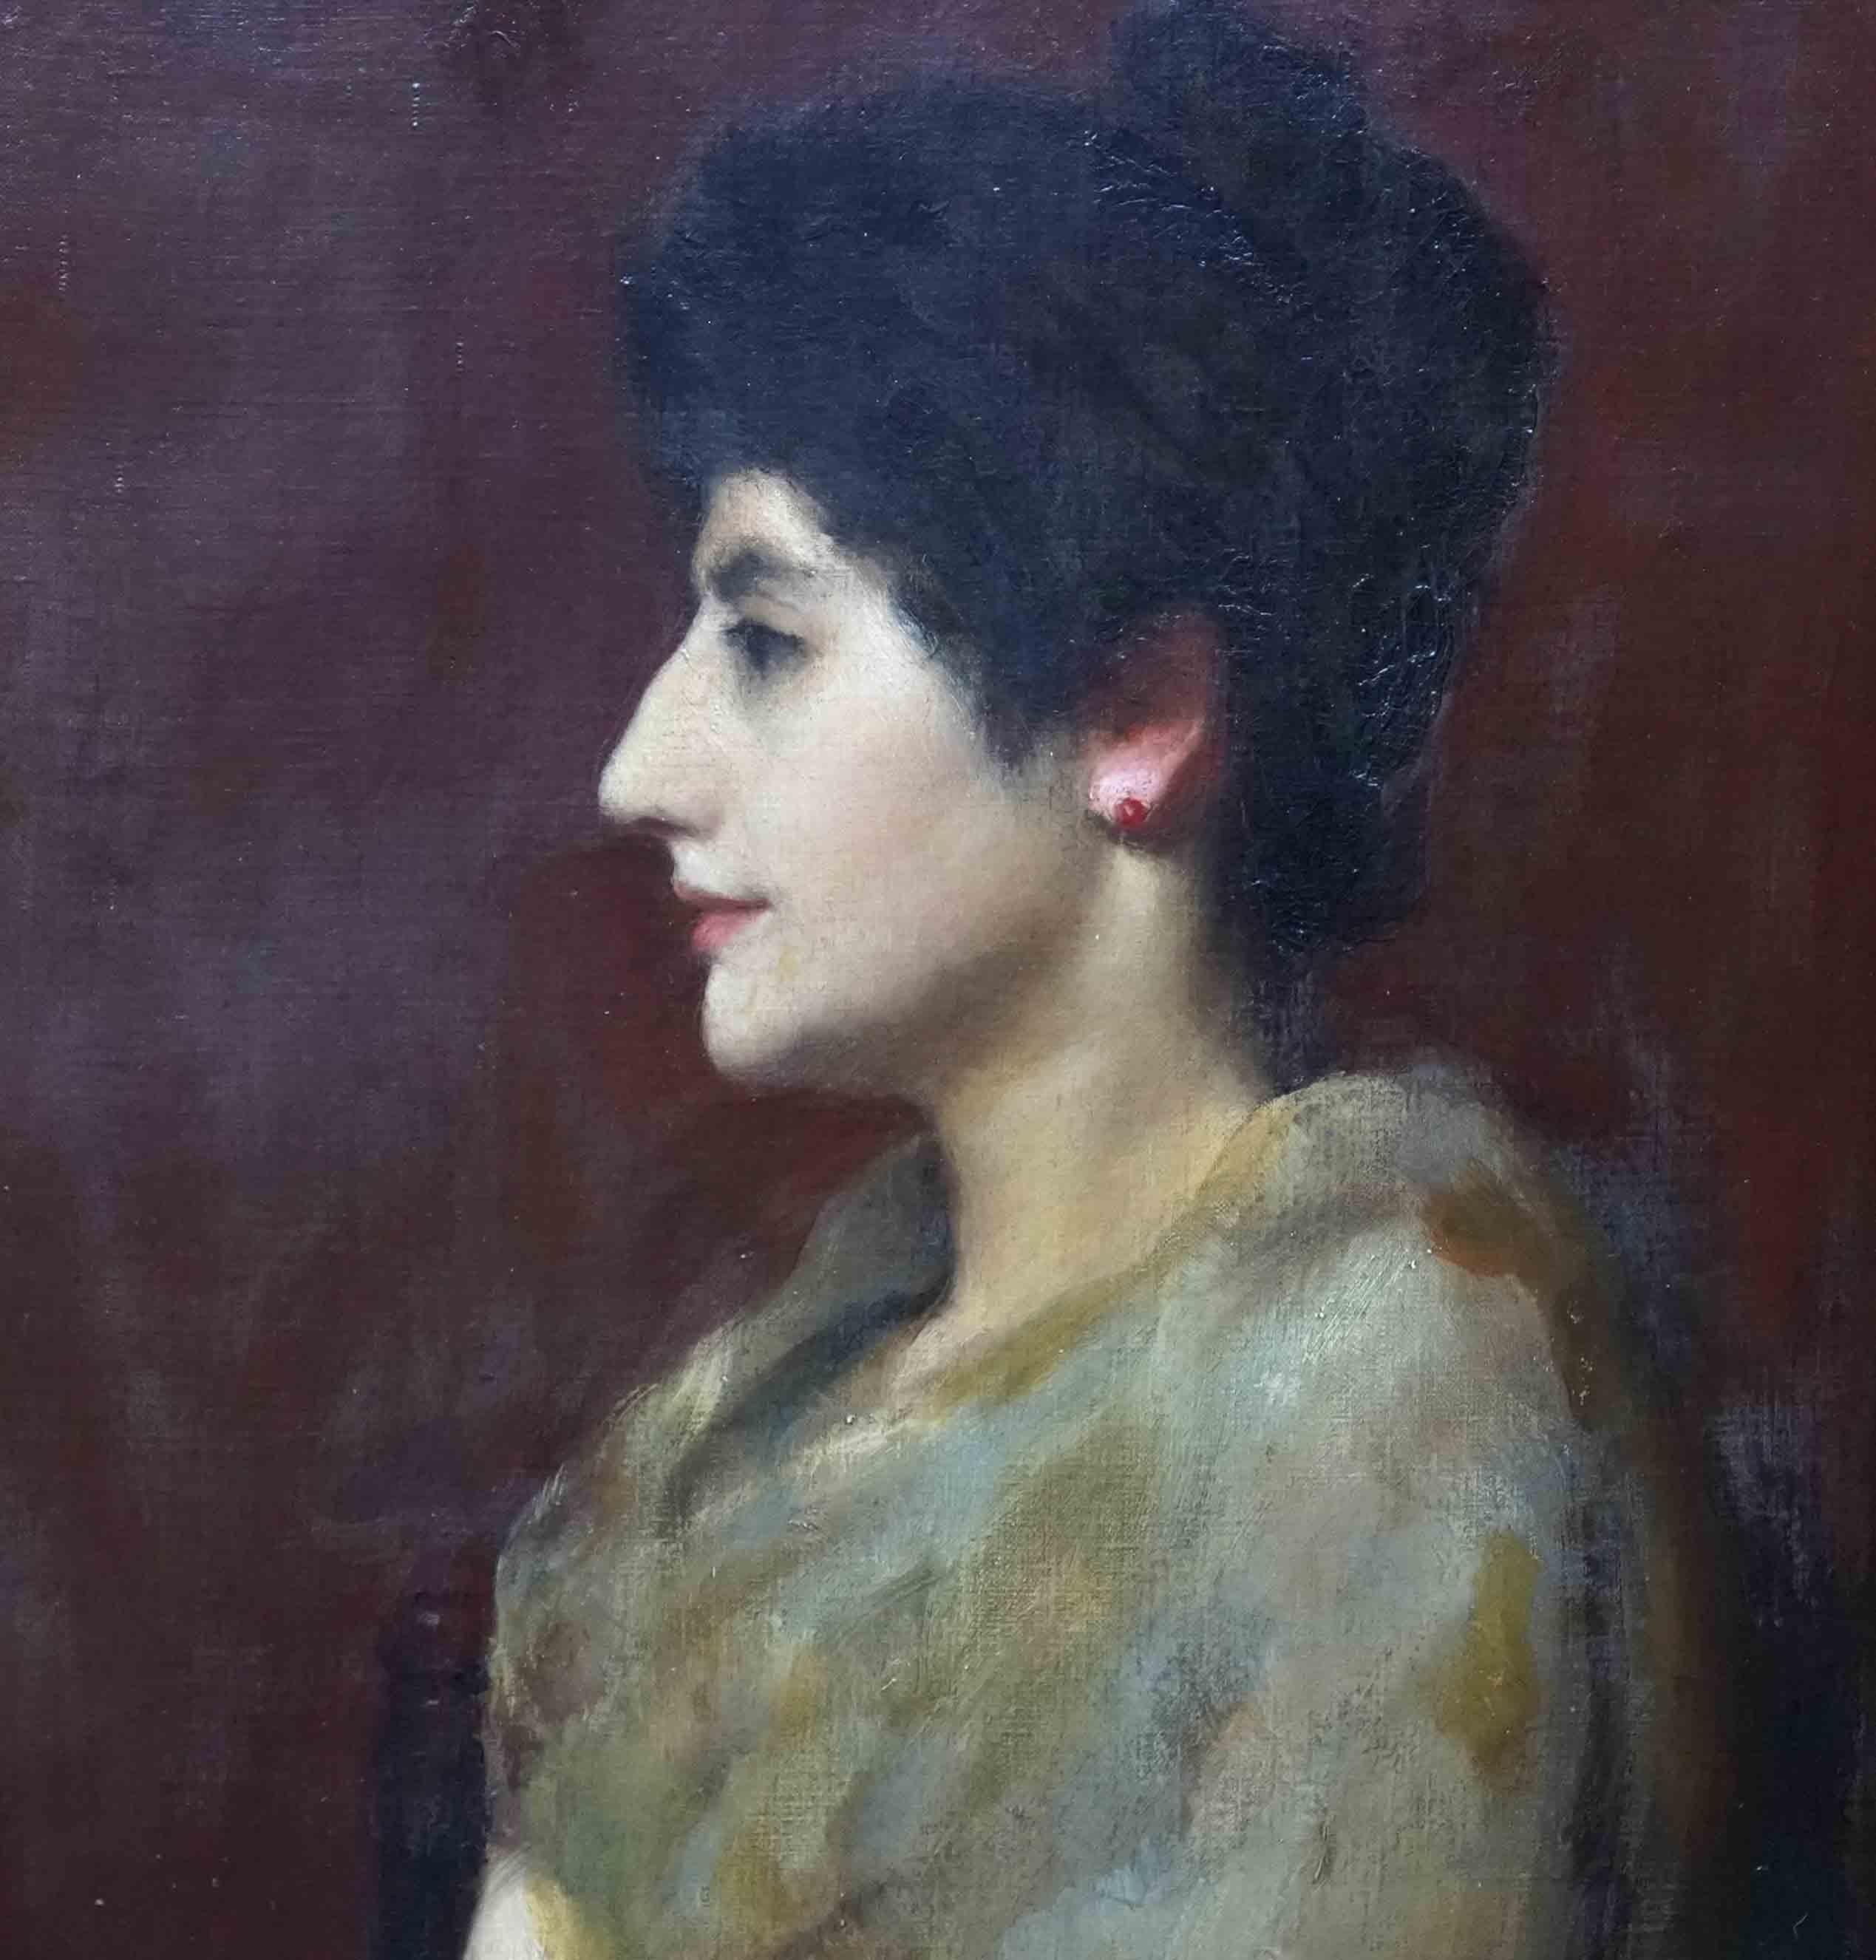 This lovely British Victorian portrait oil painting is by British portrait artist Edward Spilsbury Swinson. It was painted in 1891 and is dated and signed lower right. It is a half length profile portrait of a dark haired woman in a gold/brown dress